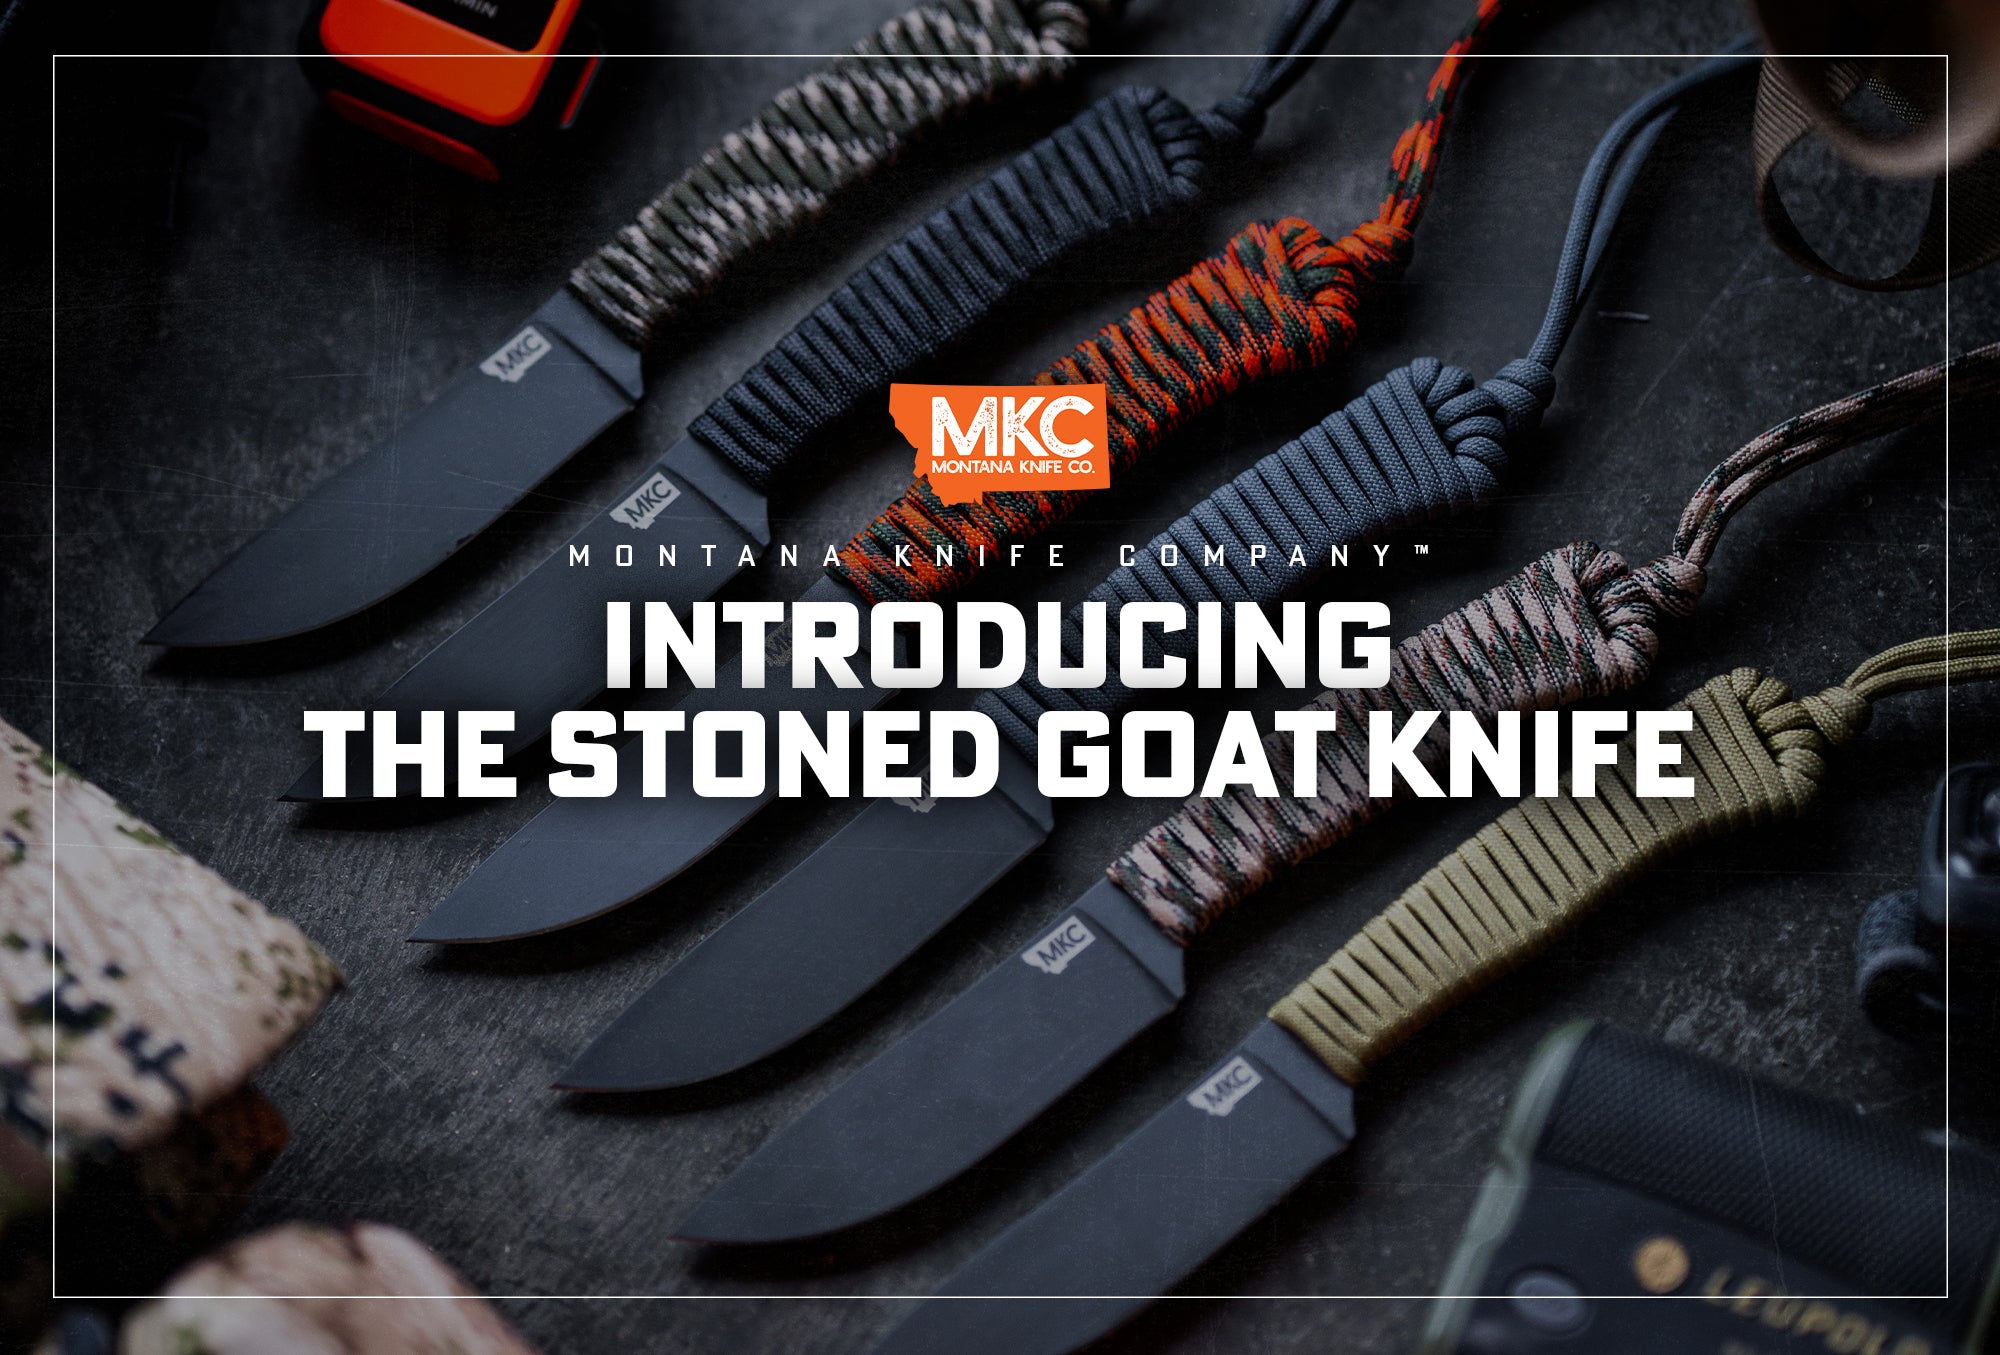 Six MKC Stoned Goat blades with varying paracord handle colors lie at an angle on a dark background.